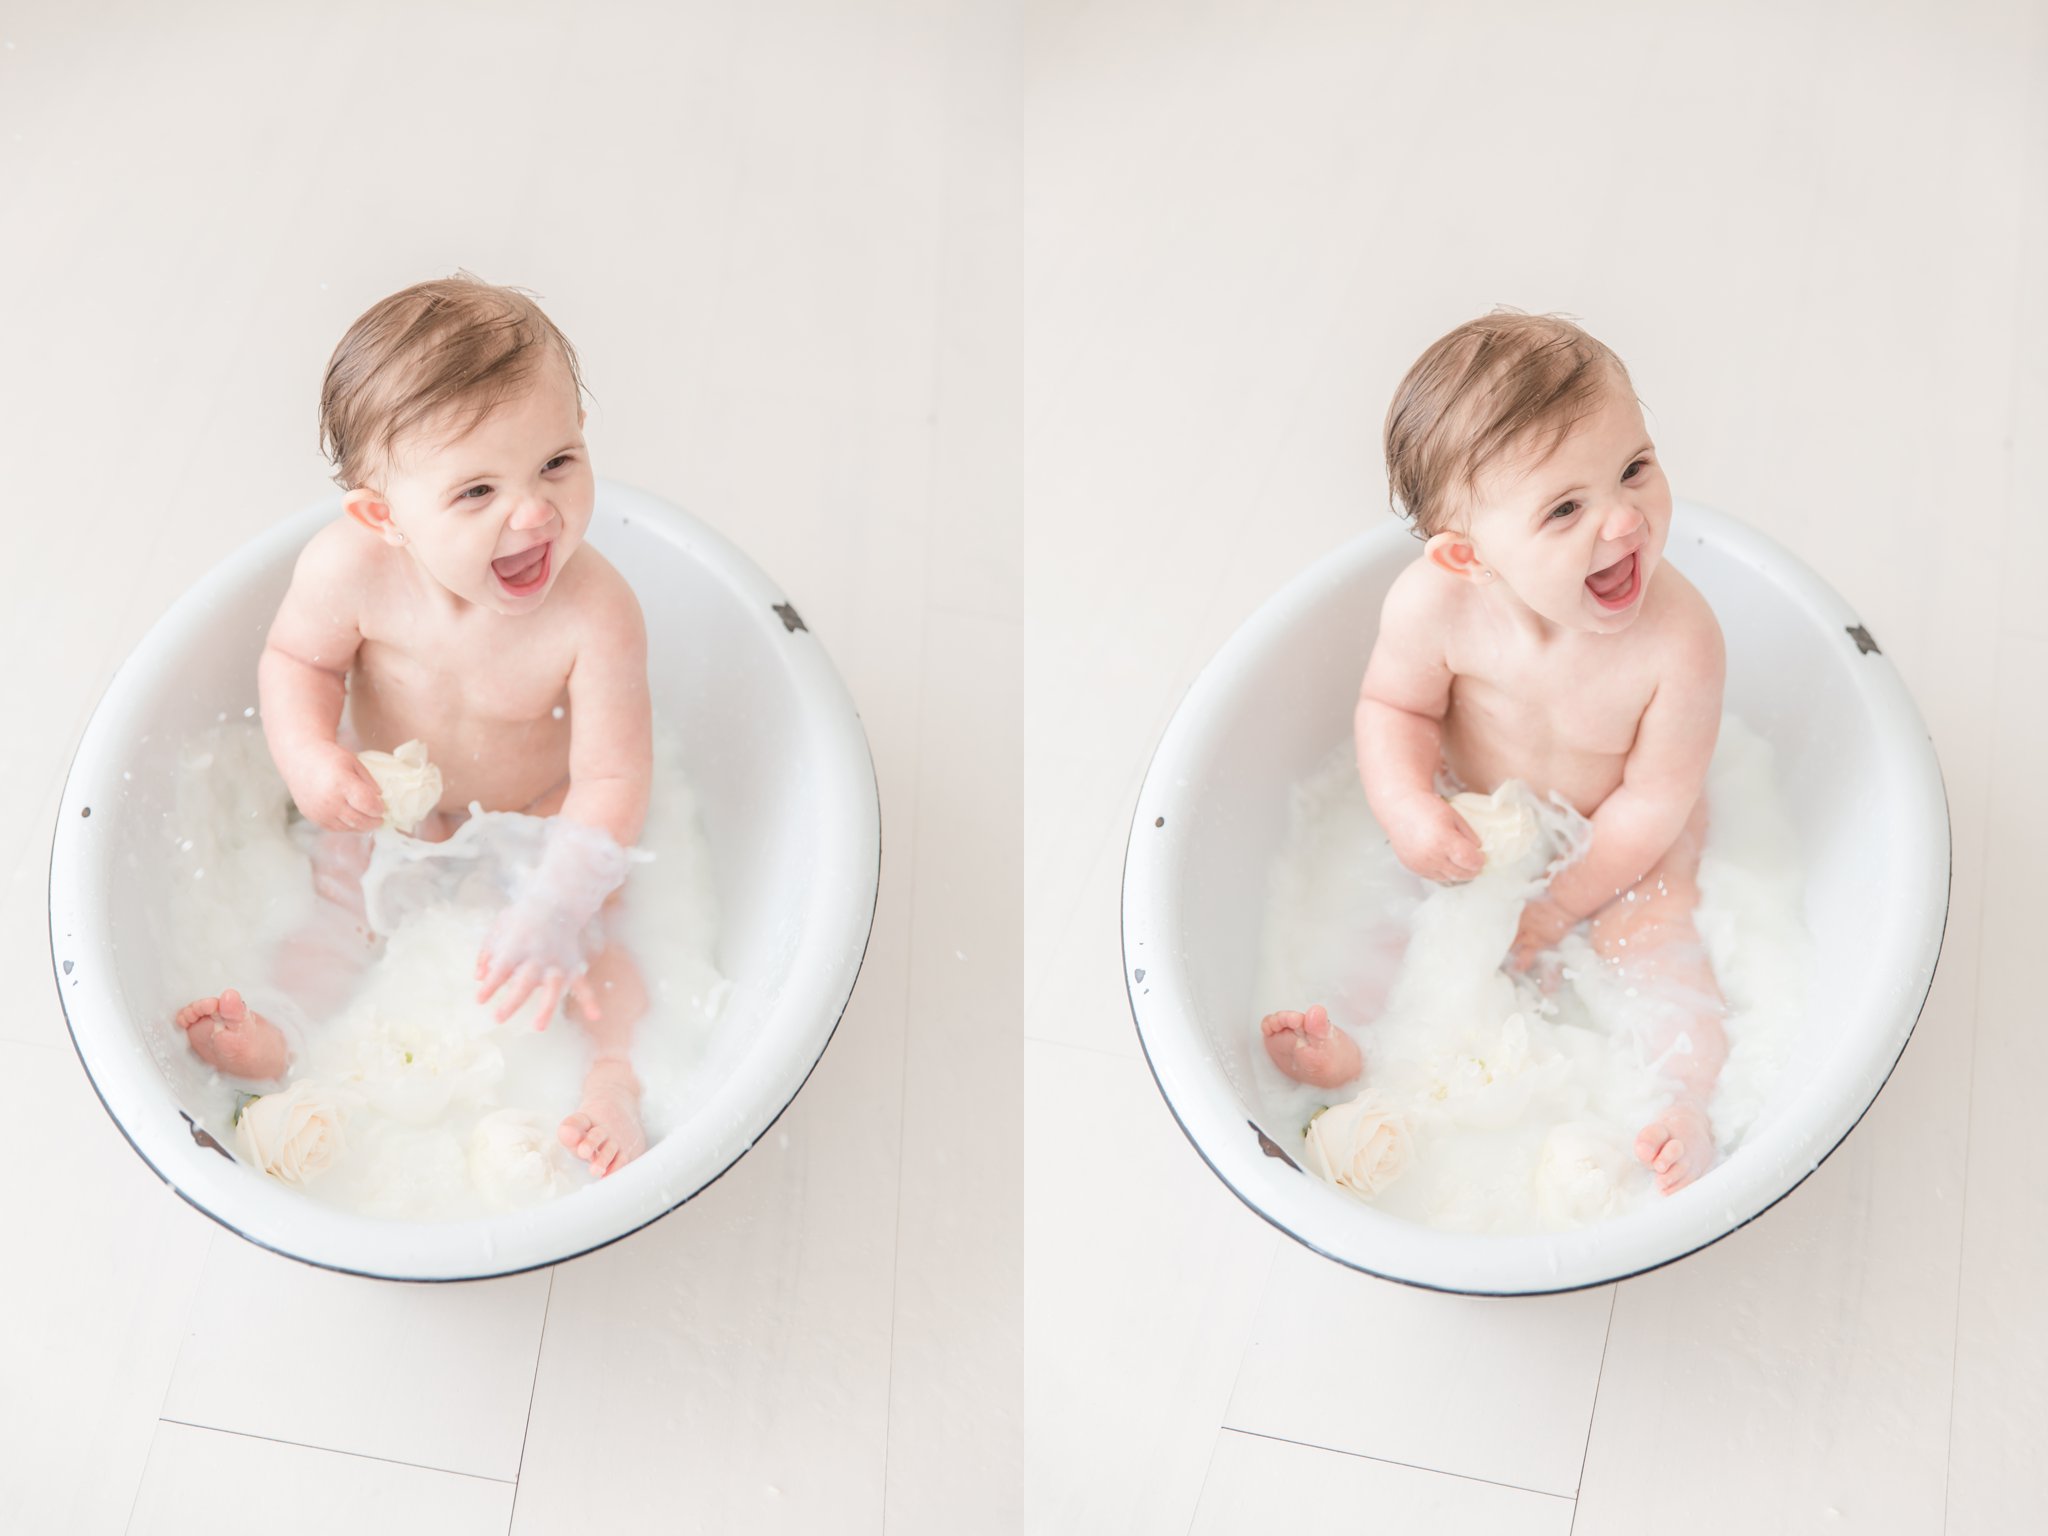 One Year old baby playing in an antique wash basin in jupiter florida photo studio.  